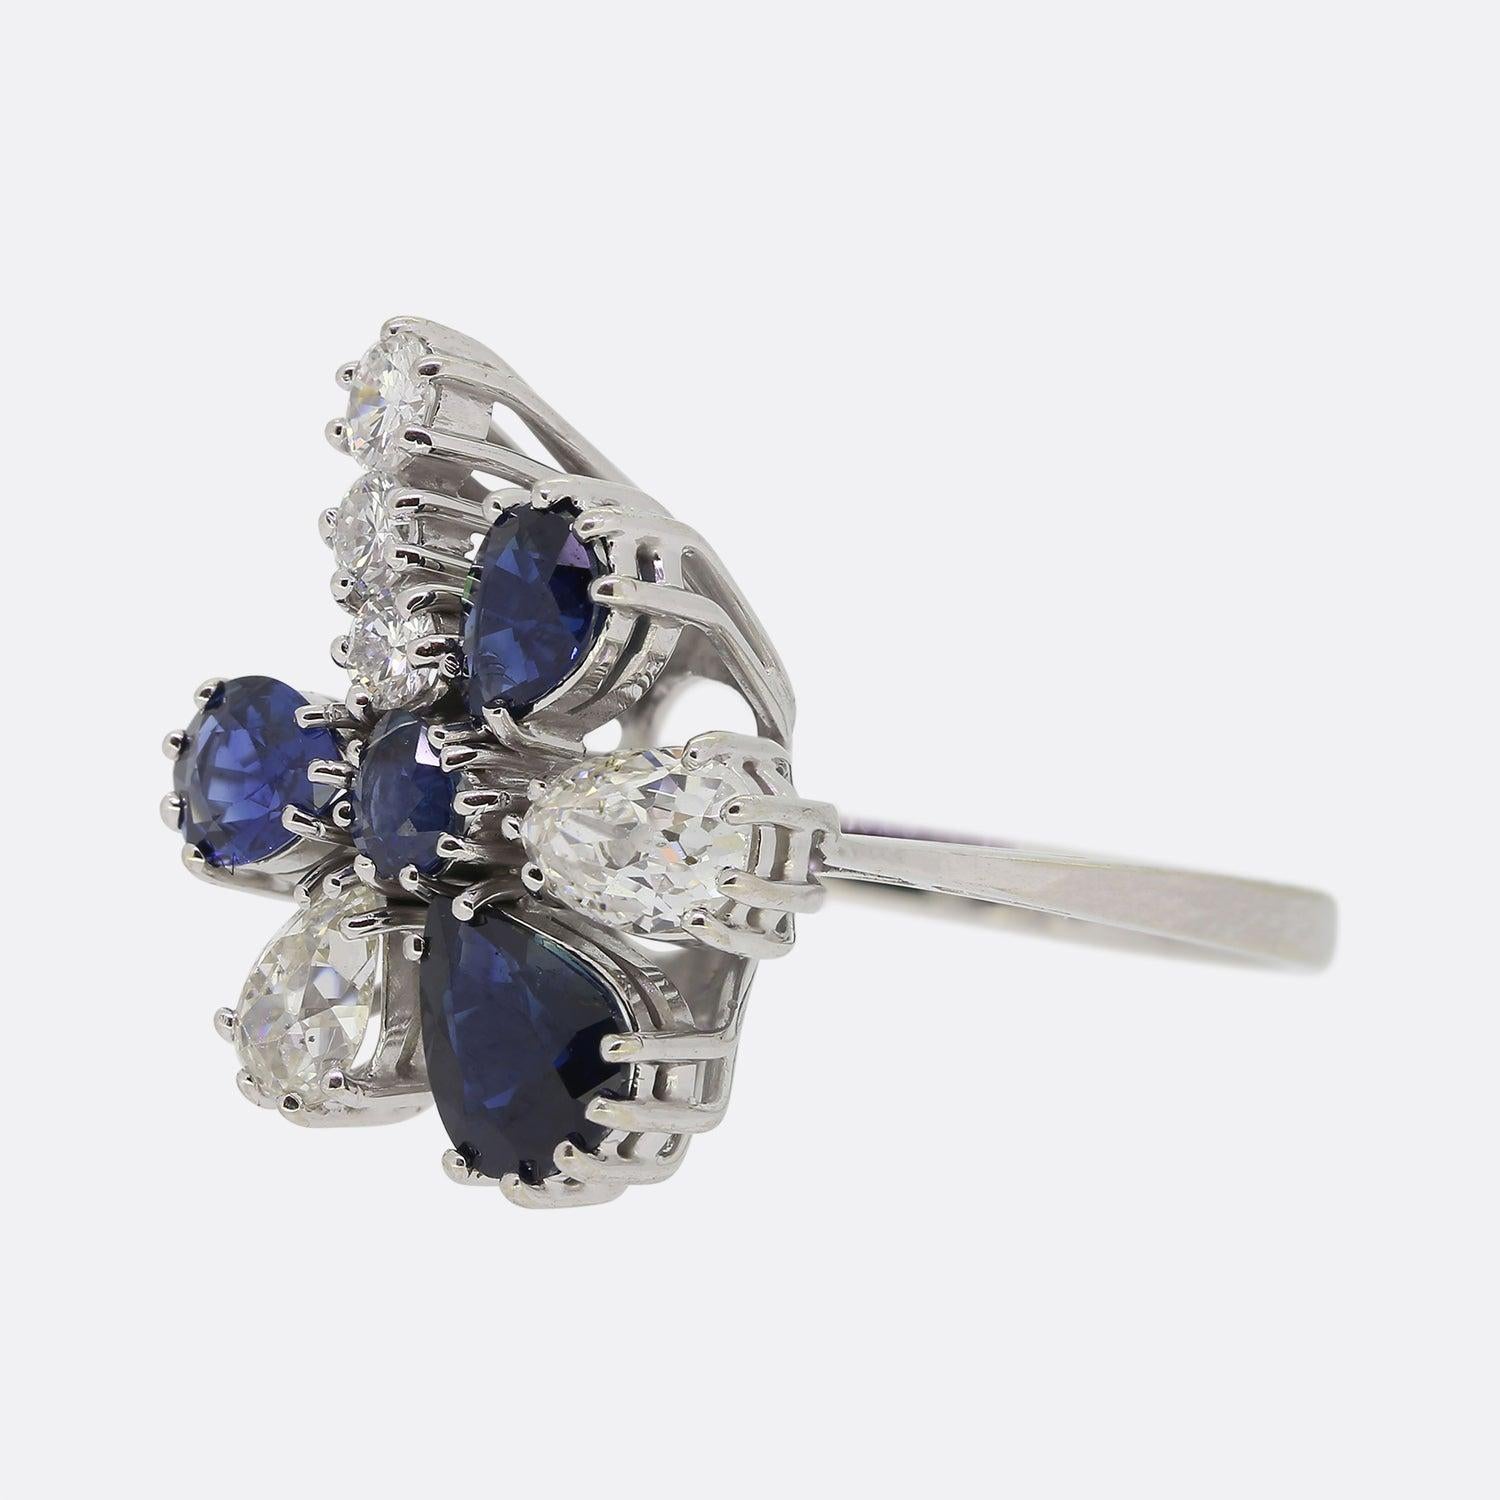 Here we have a wonderful vintage sapphire and diamond cluster ring. The ring features four pear cut sapphires, two old pear cut diamonds and three round brilliant cut diamonds. The ring is crafted in 18ct white gold and the stones have been set in a